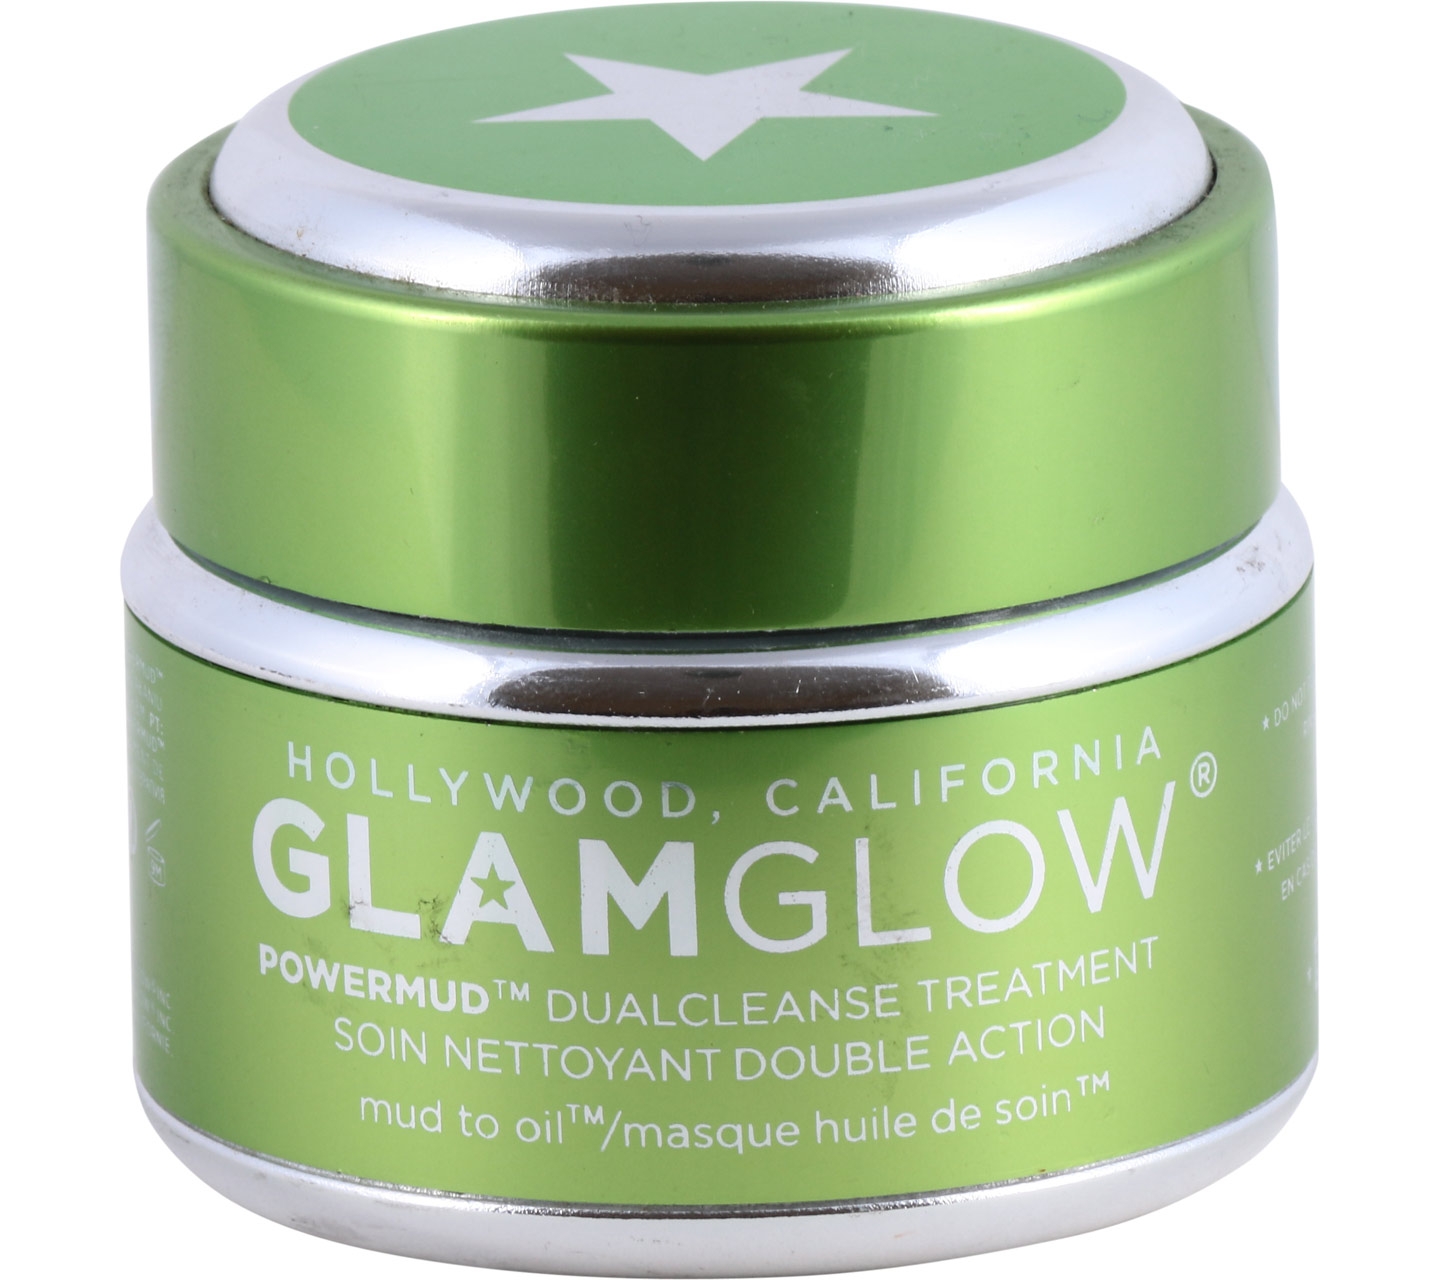 Glamglow Powermud Dualcleanse Treatment Mud to Oil Skin Care